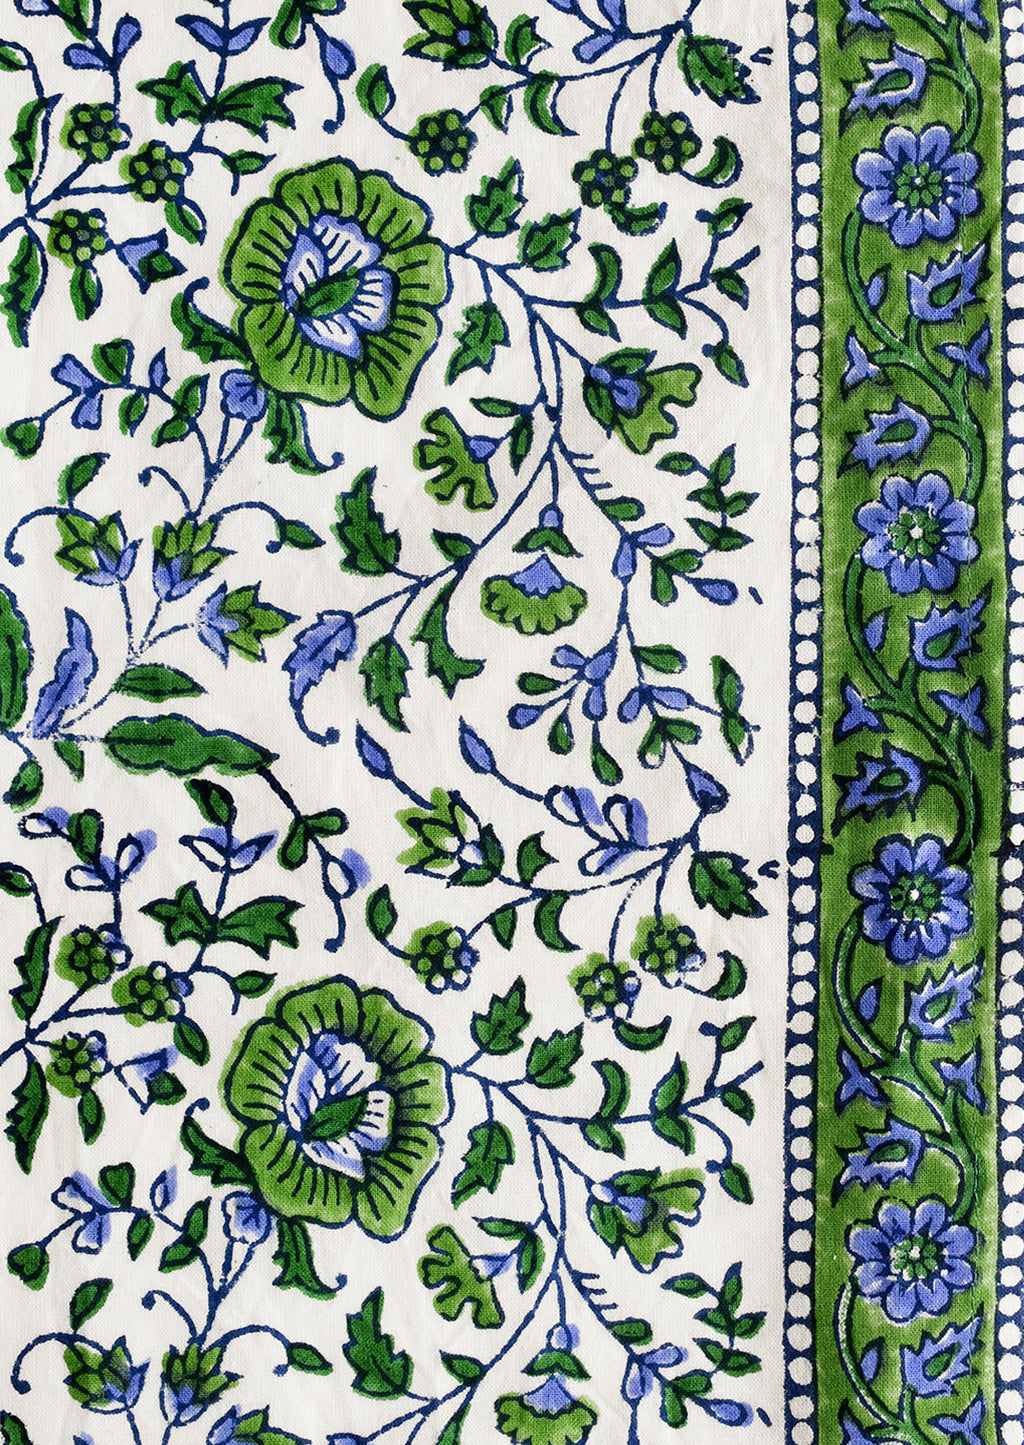 2: A block printed textile in blue and green.